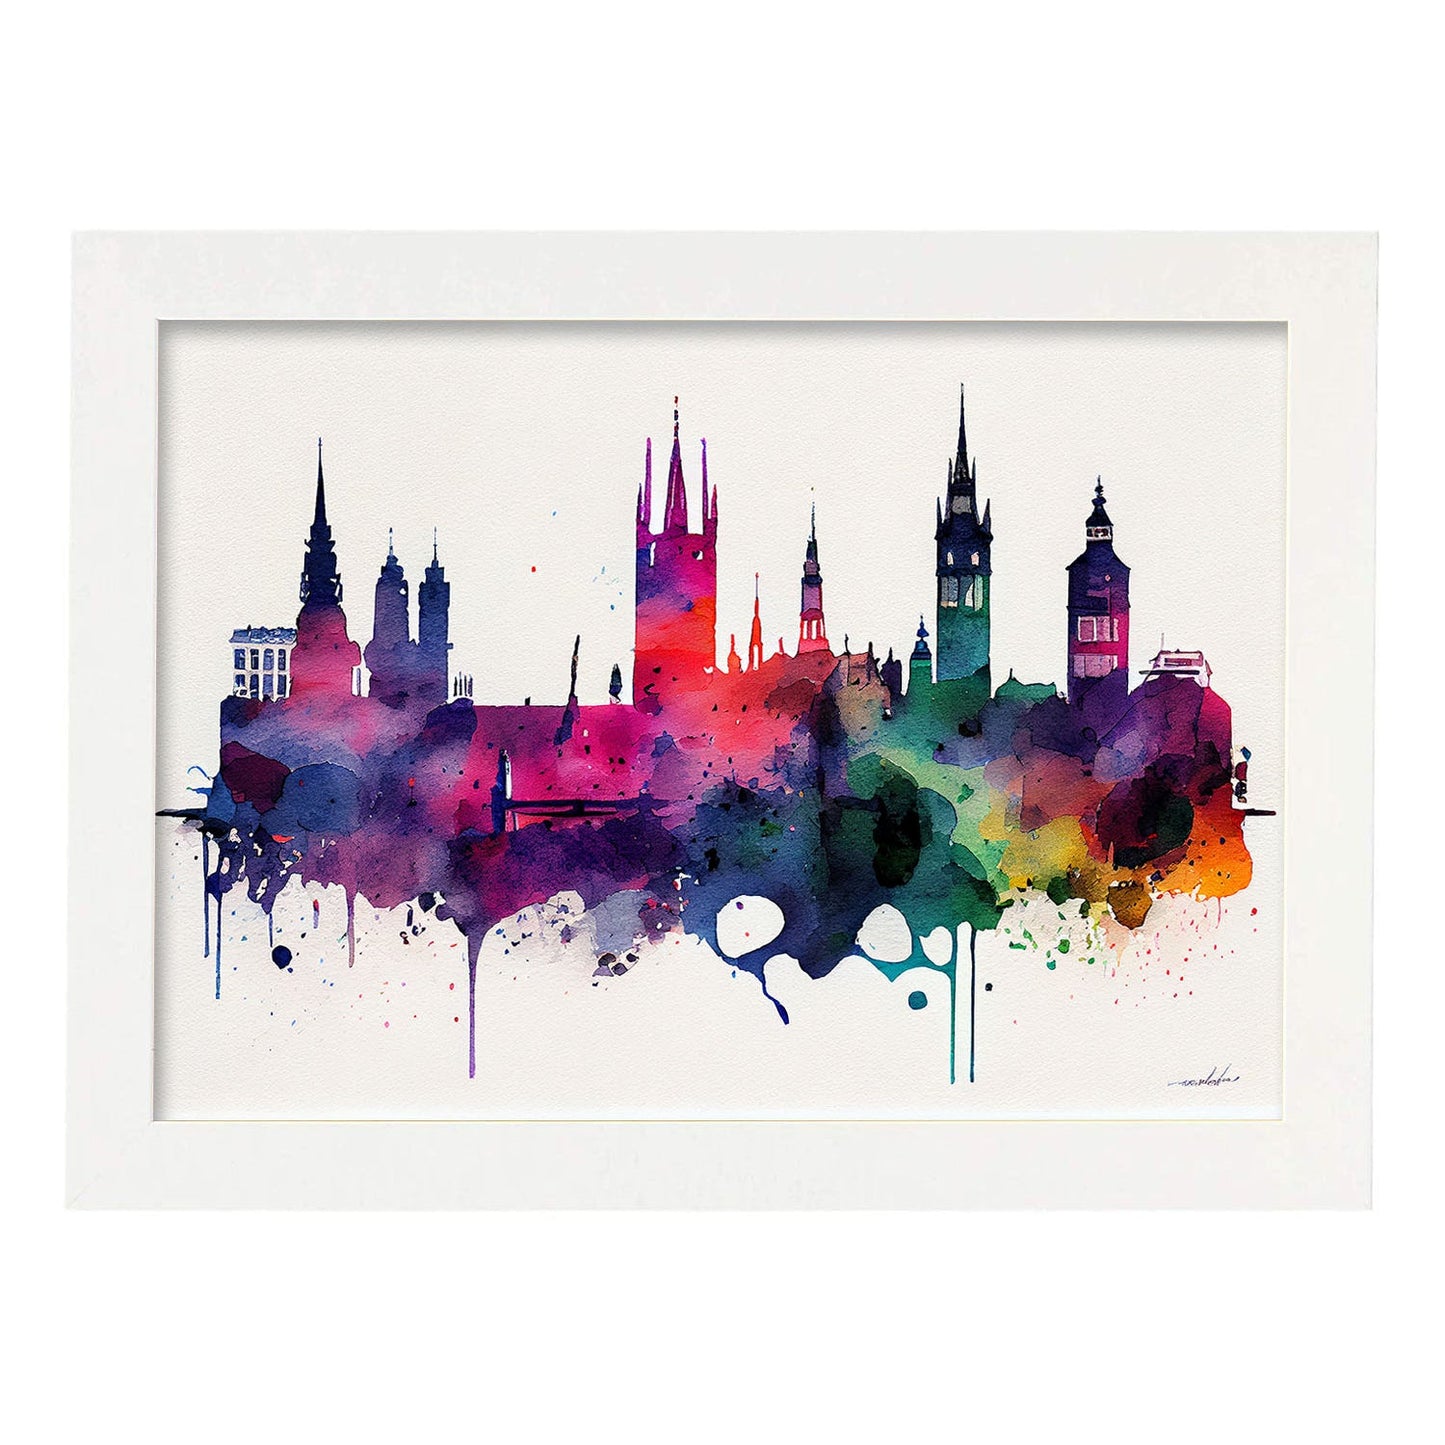 Nacnic watercolor of a skyline of the city of Krakow_1. Aesthetic Wall Art Prints for Bedroom or Living Room Design.-Artwork-Nacnic-A4-Marco Blanco-Nacnic Estudio SL